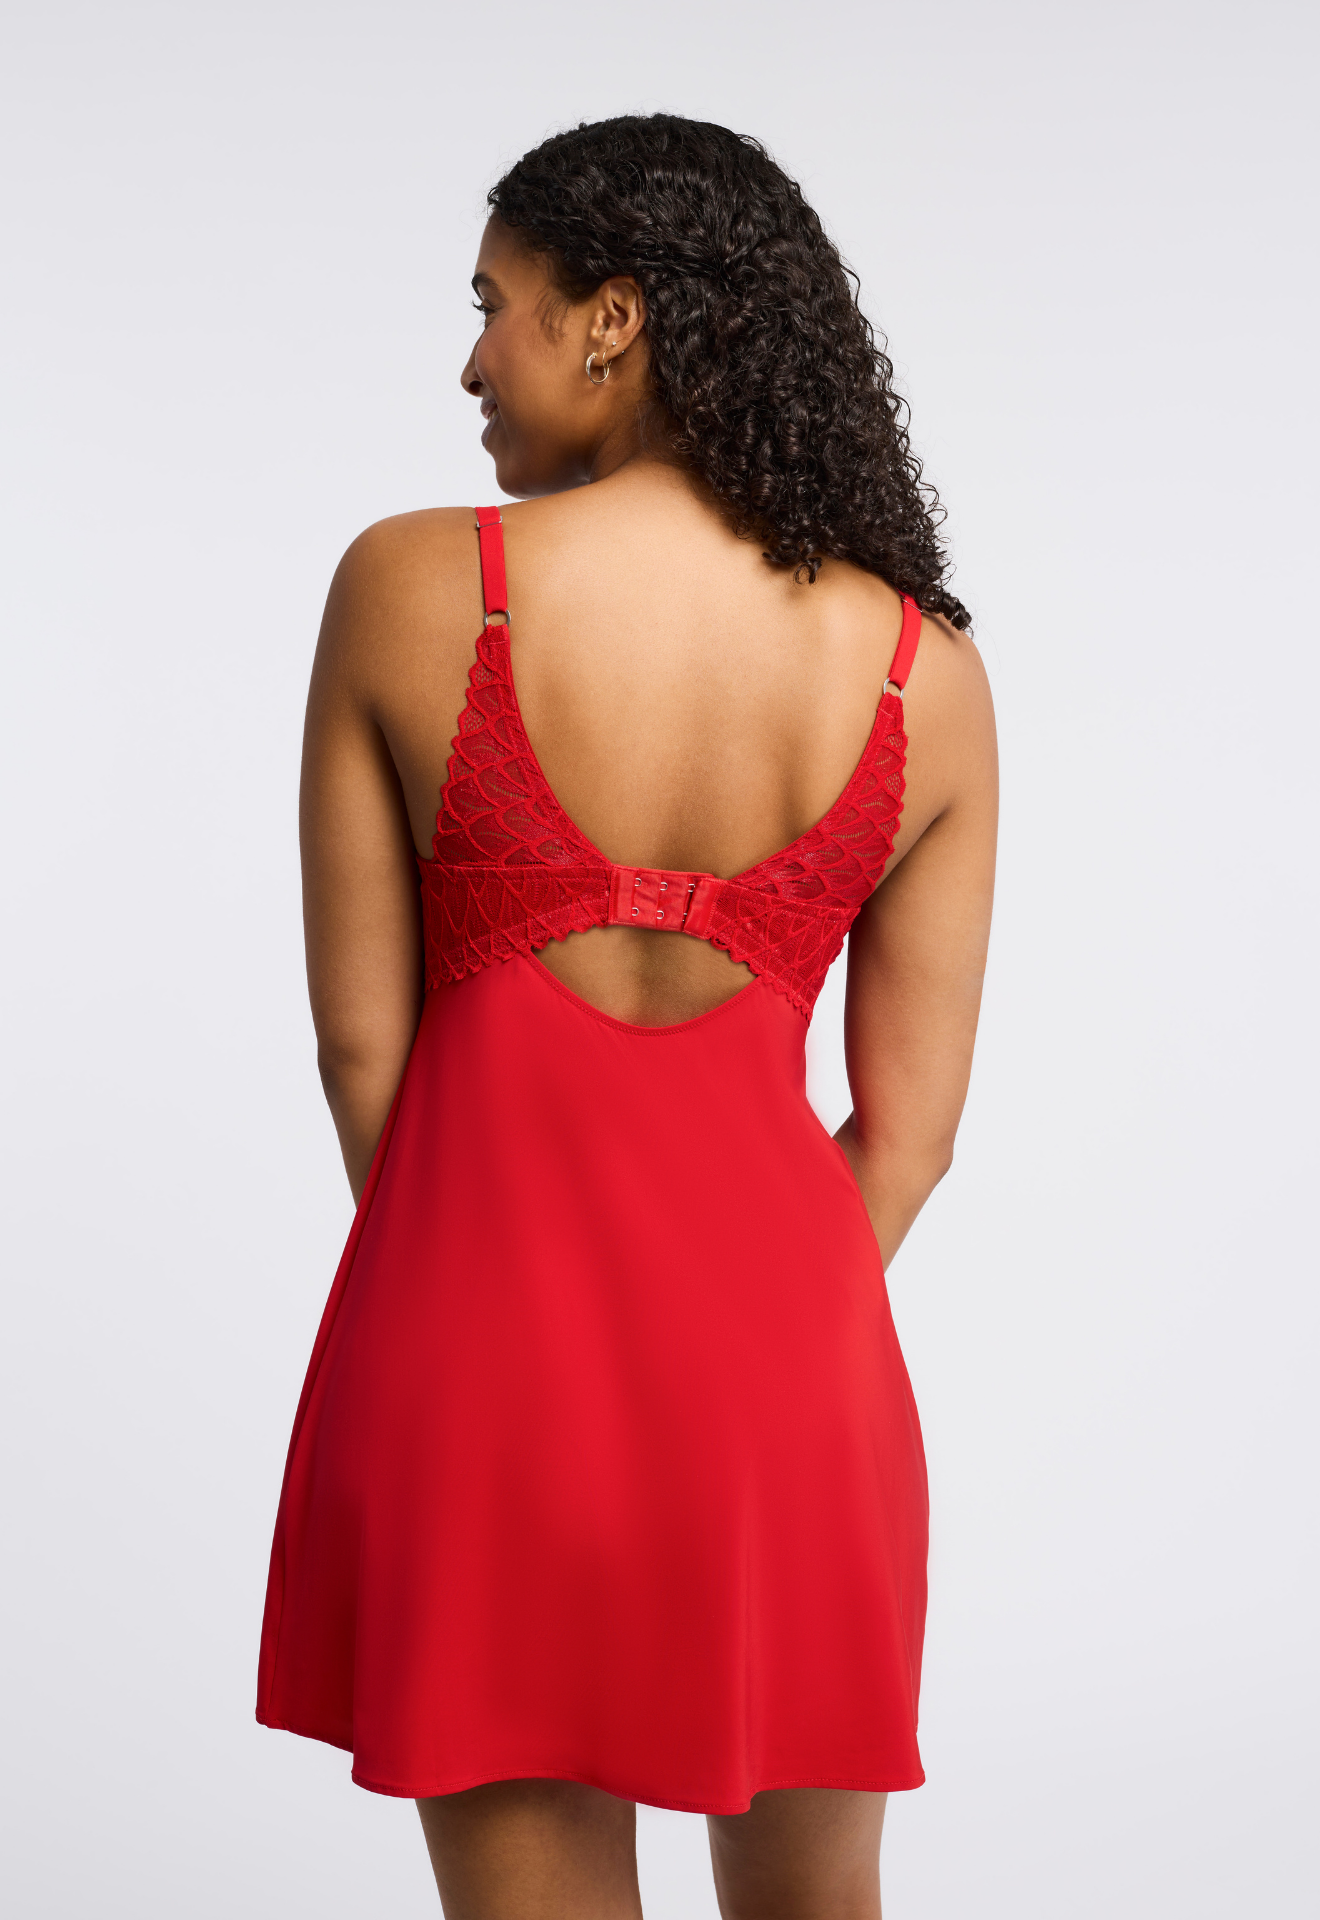 Lacy Muse Babydoll Set - Sweet Red worn by model back view